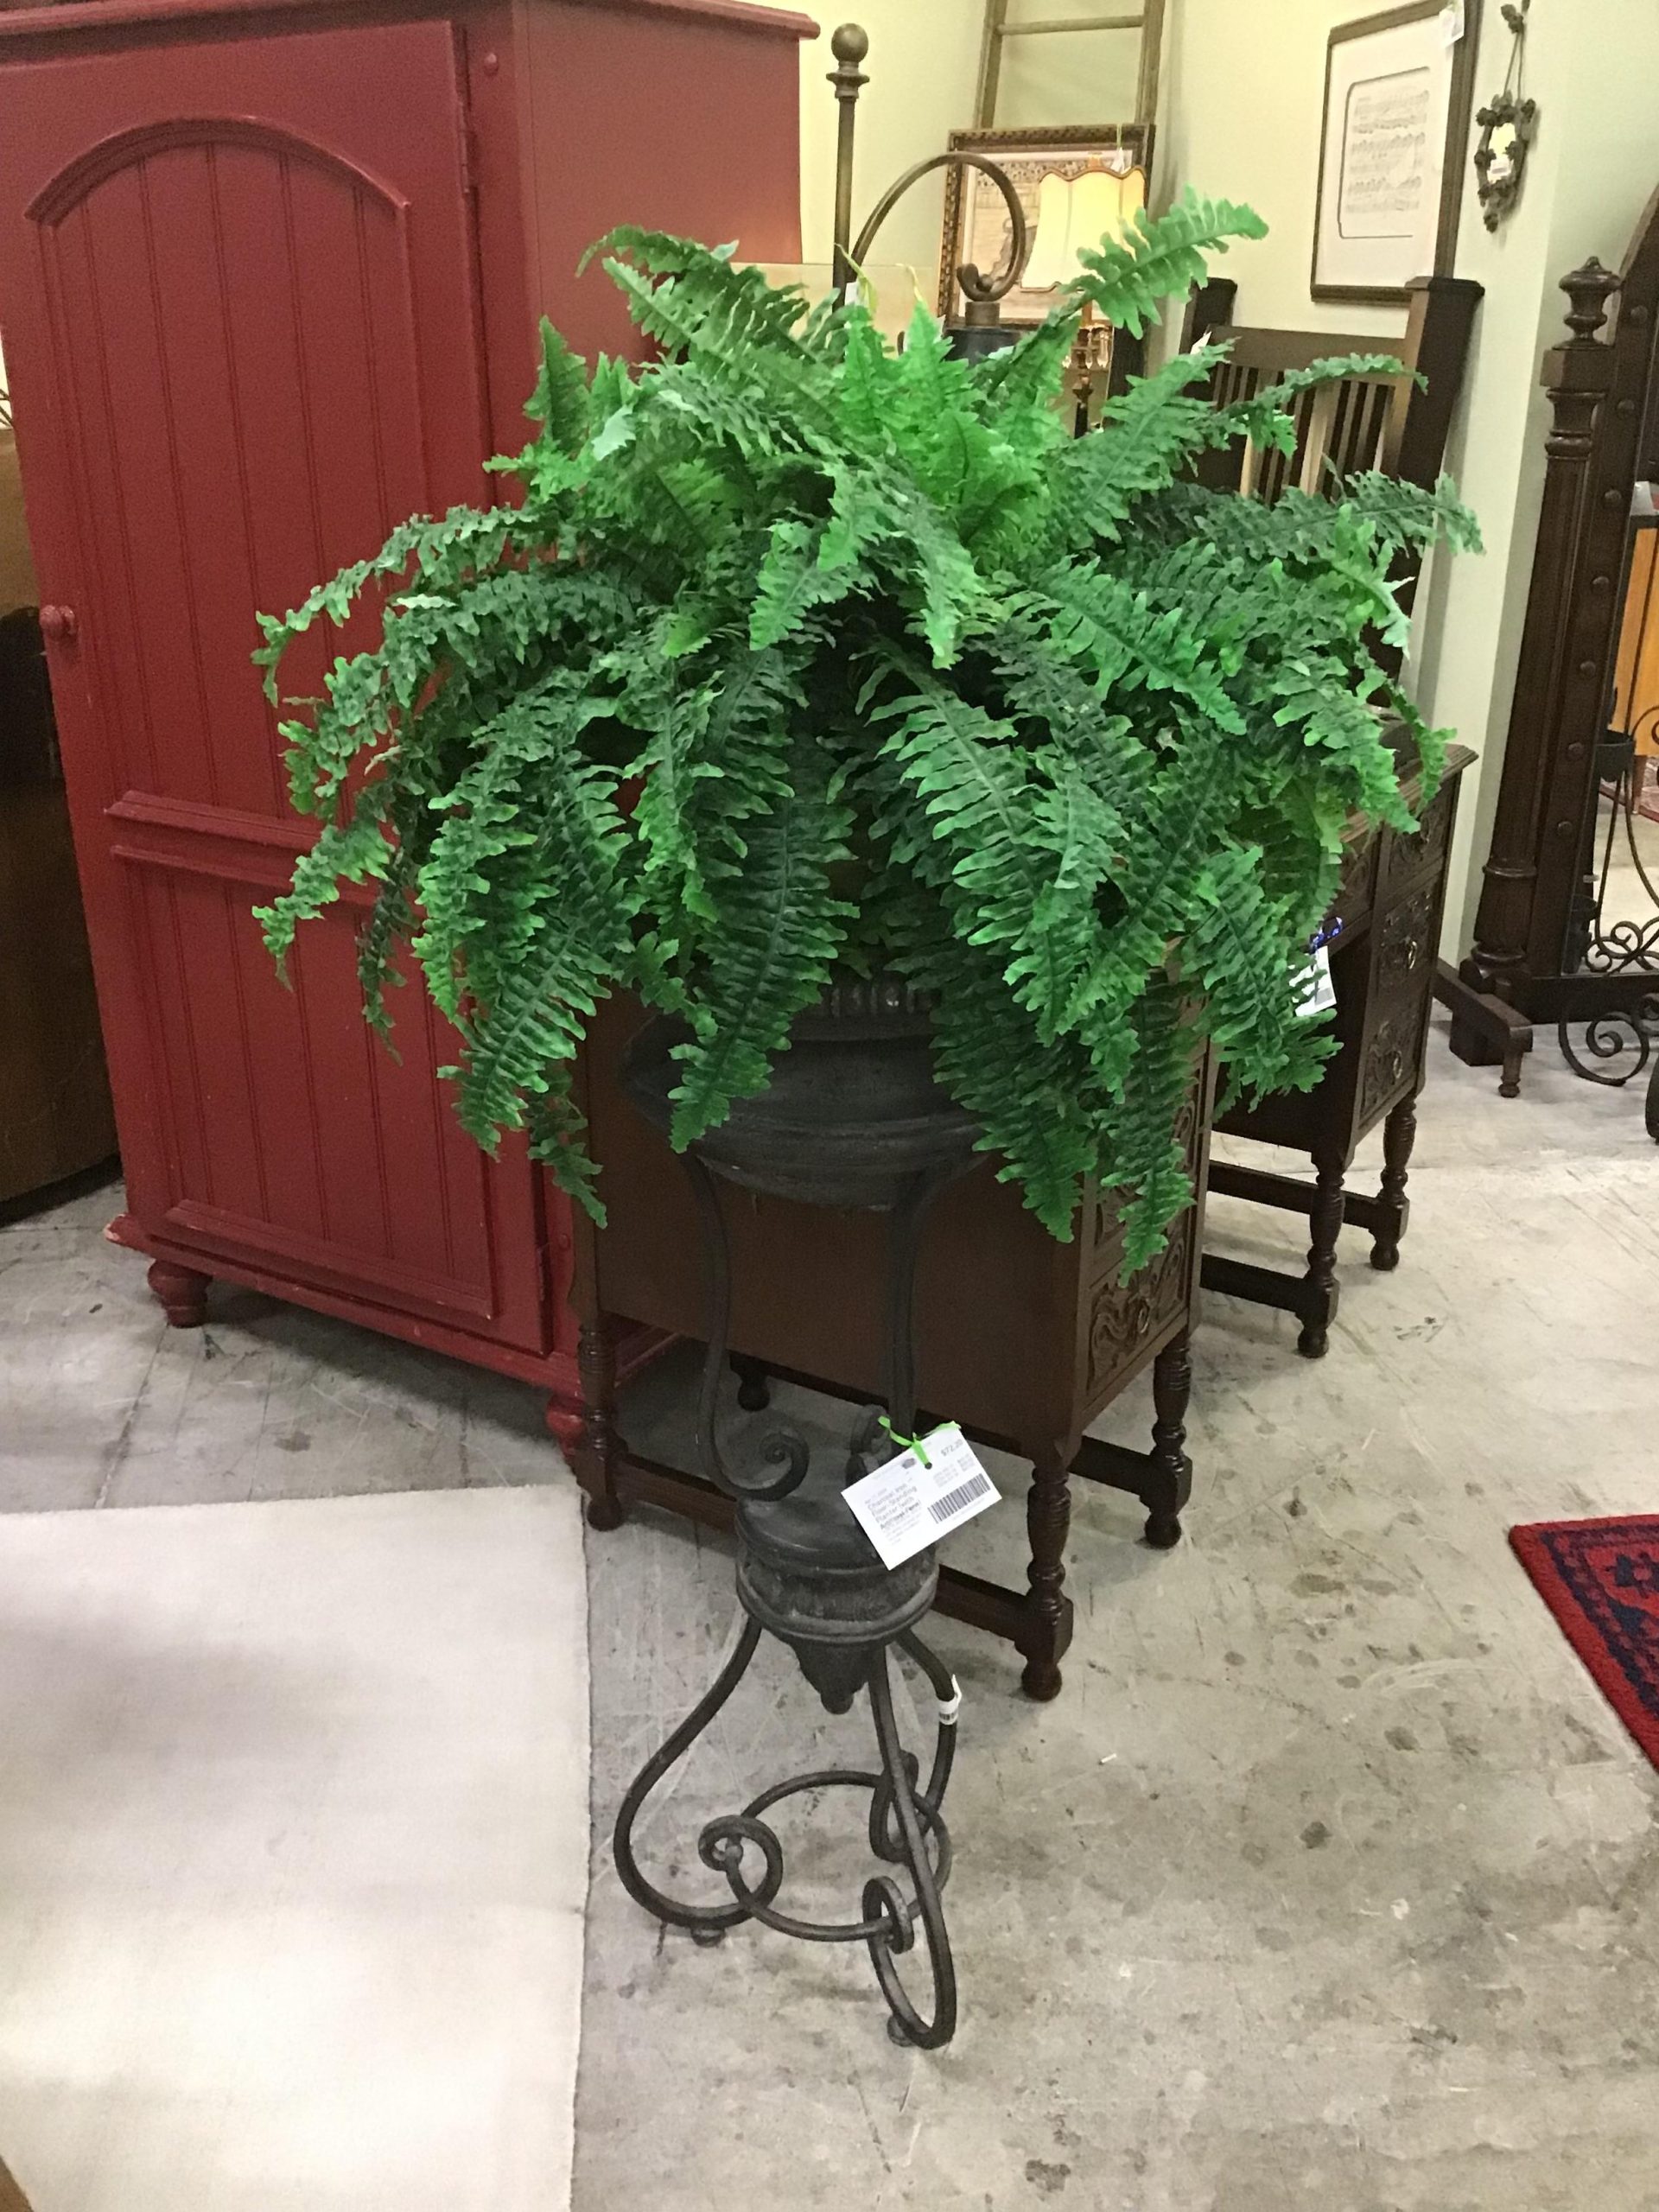 Charcoal Iron Floor-Standing Planter (with Artificial Fern)